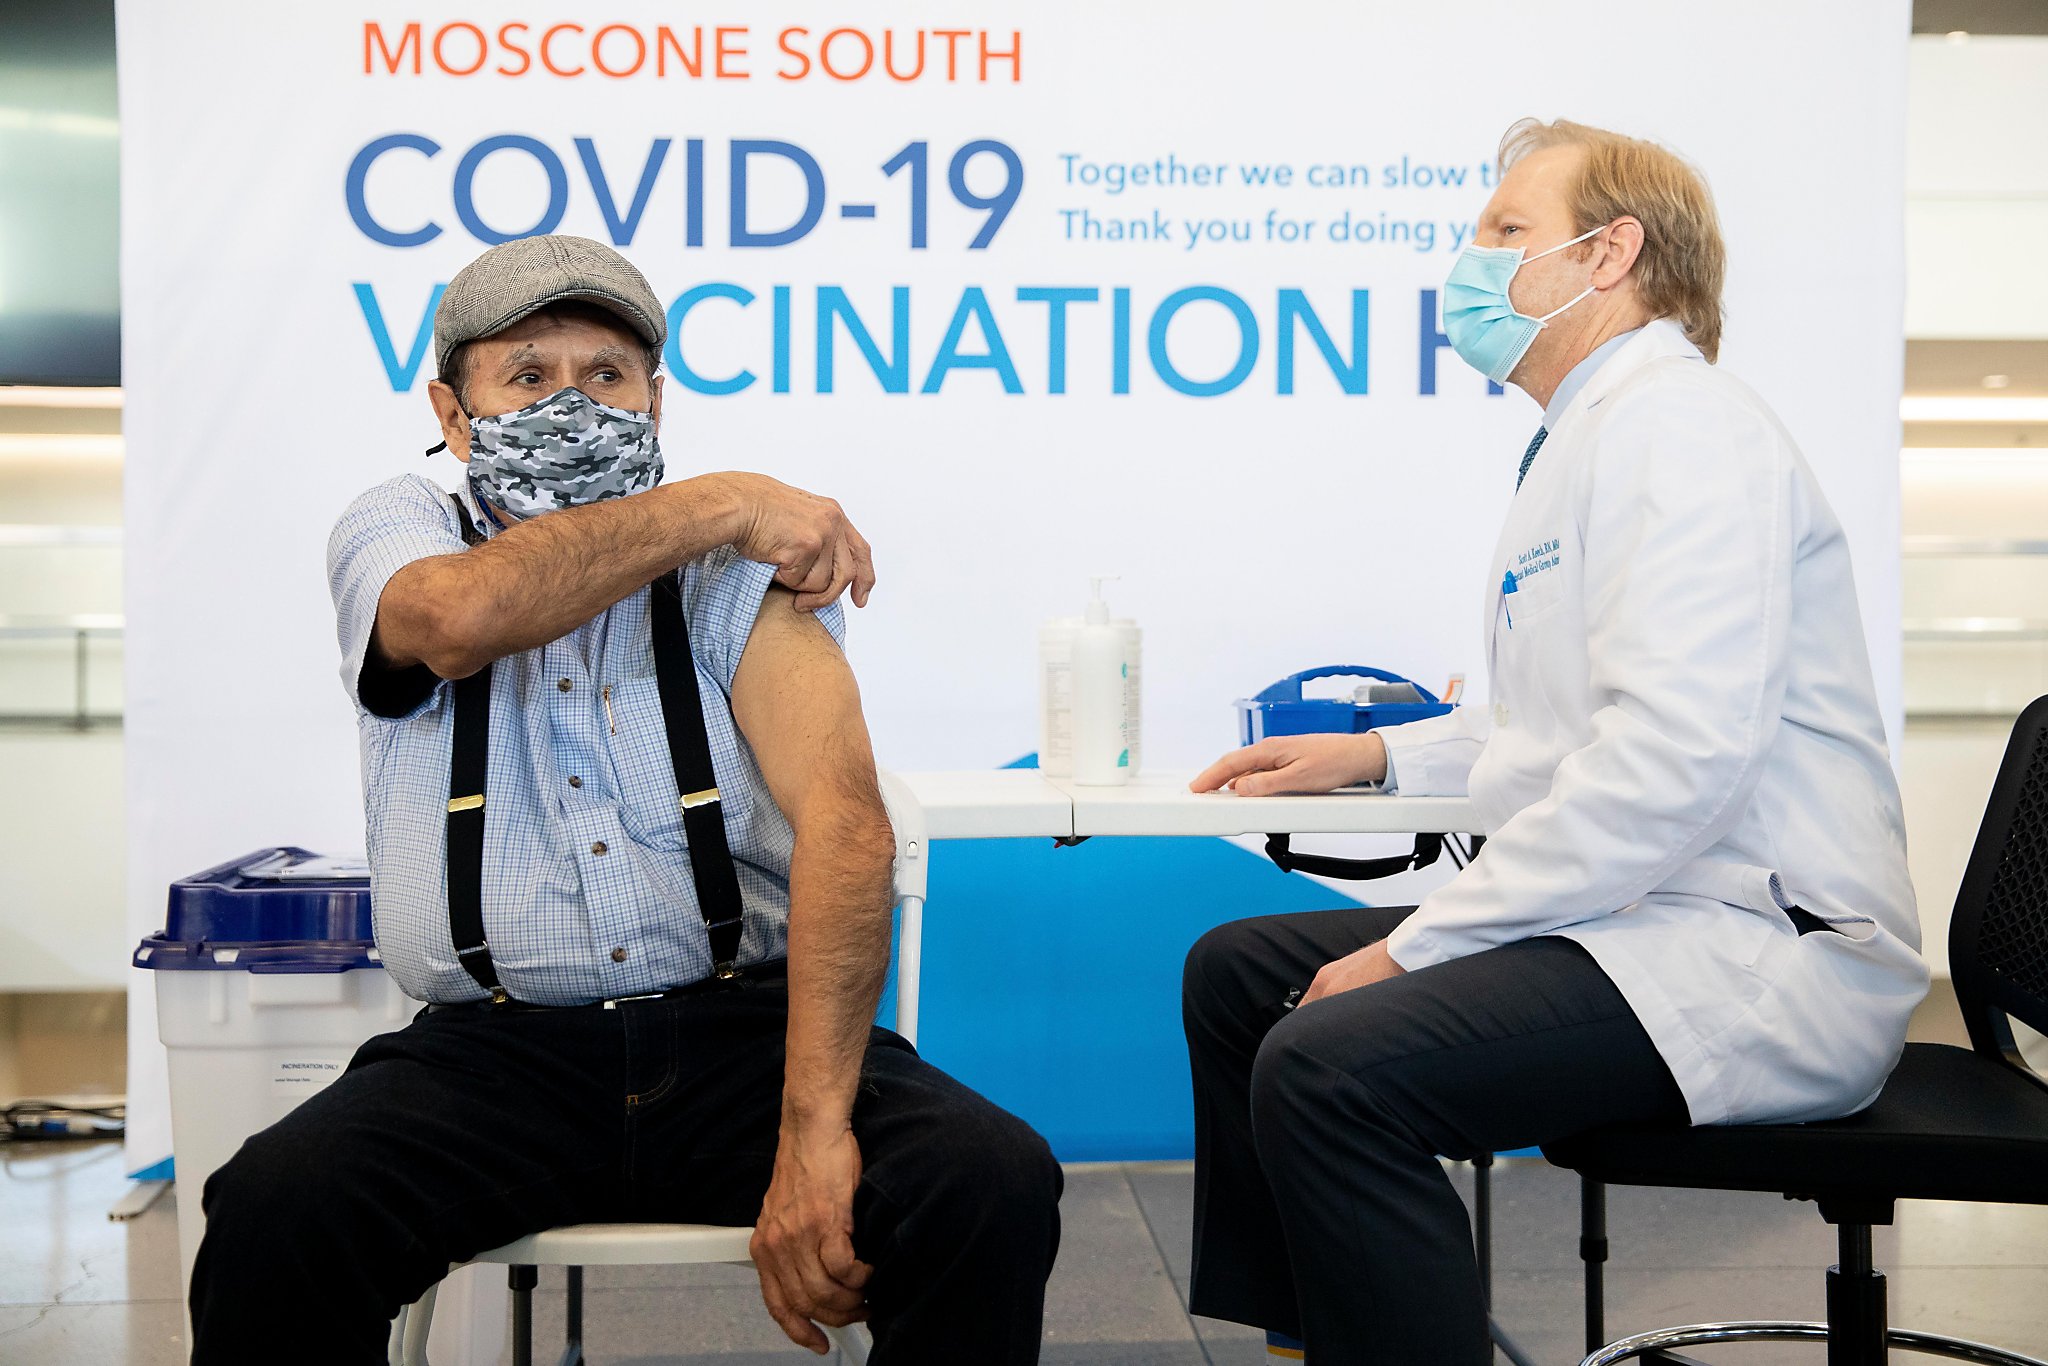 San Francisco will stop vaccinations at Moscone Center, City College as supplies run out